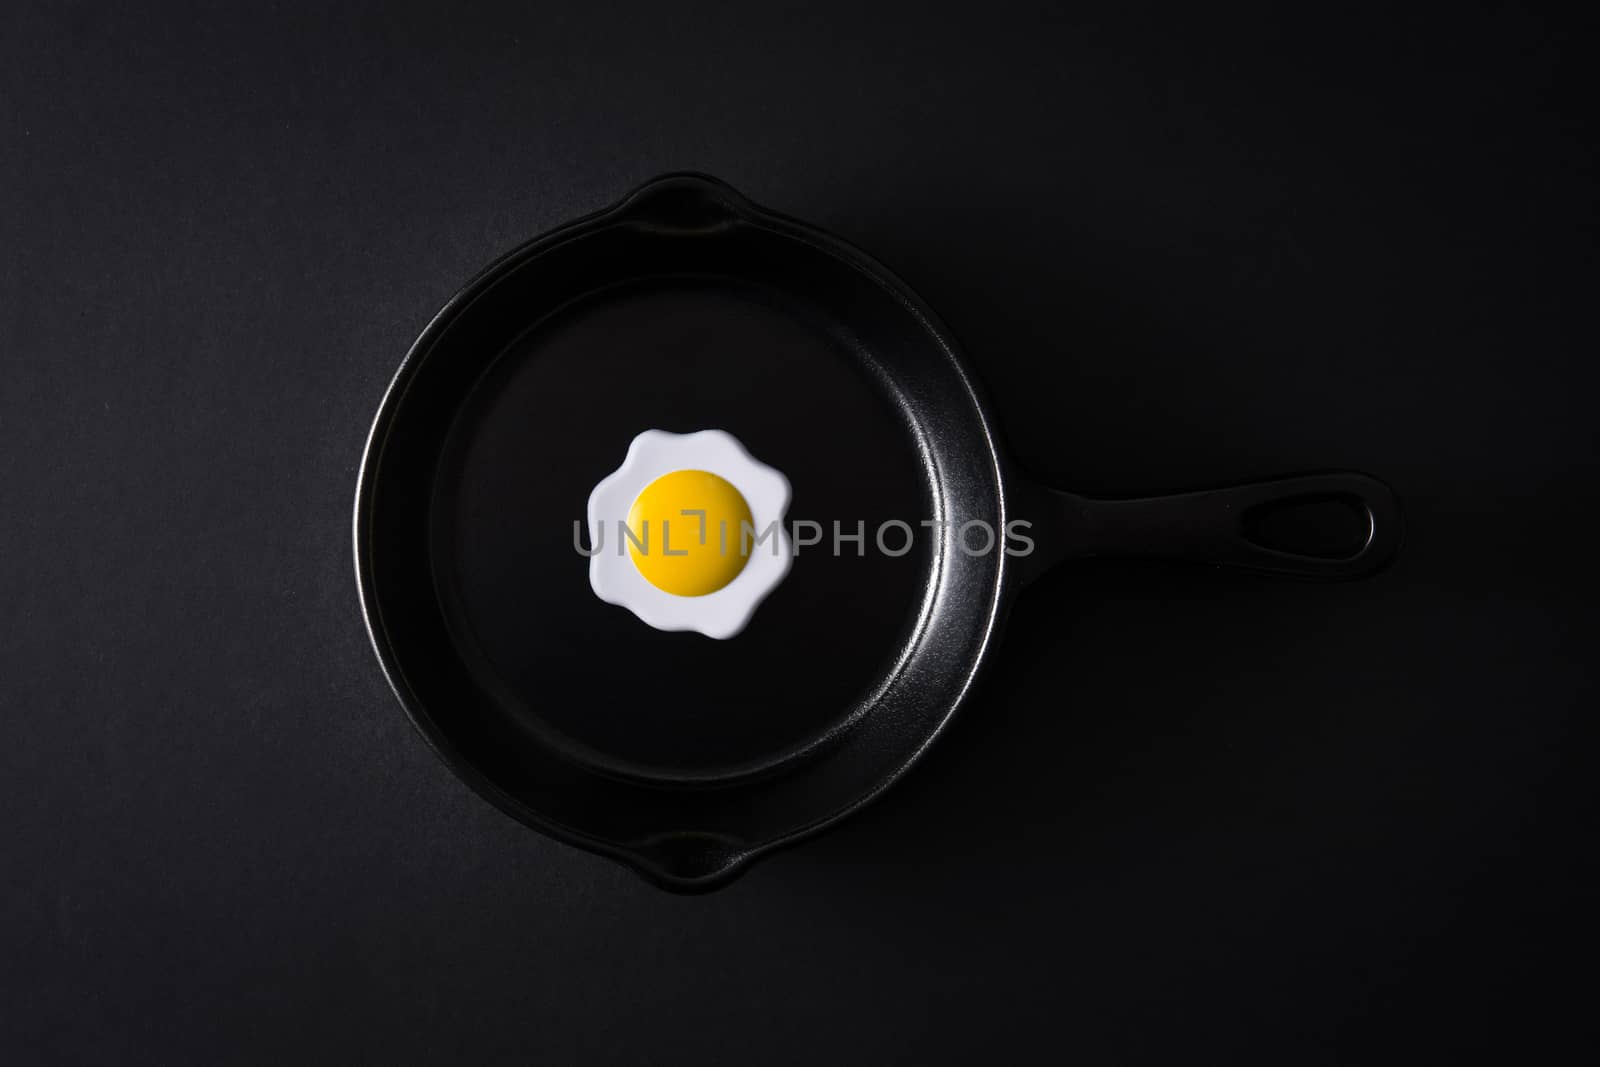 Black frying pan with egg inside by chandlervid85